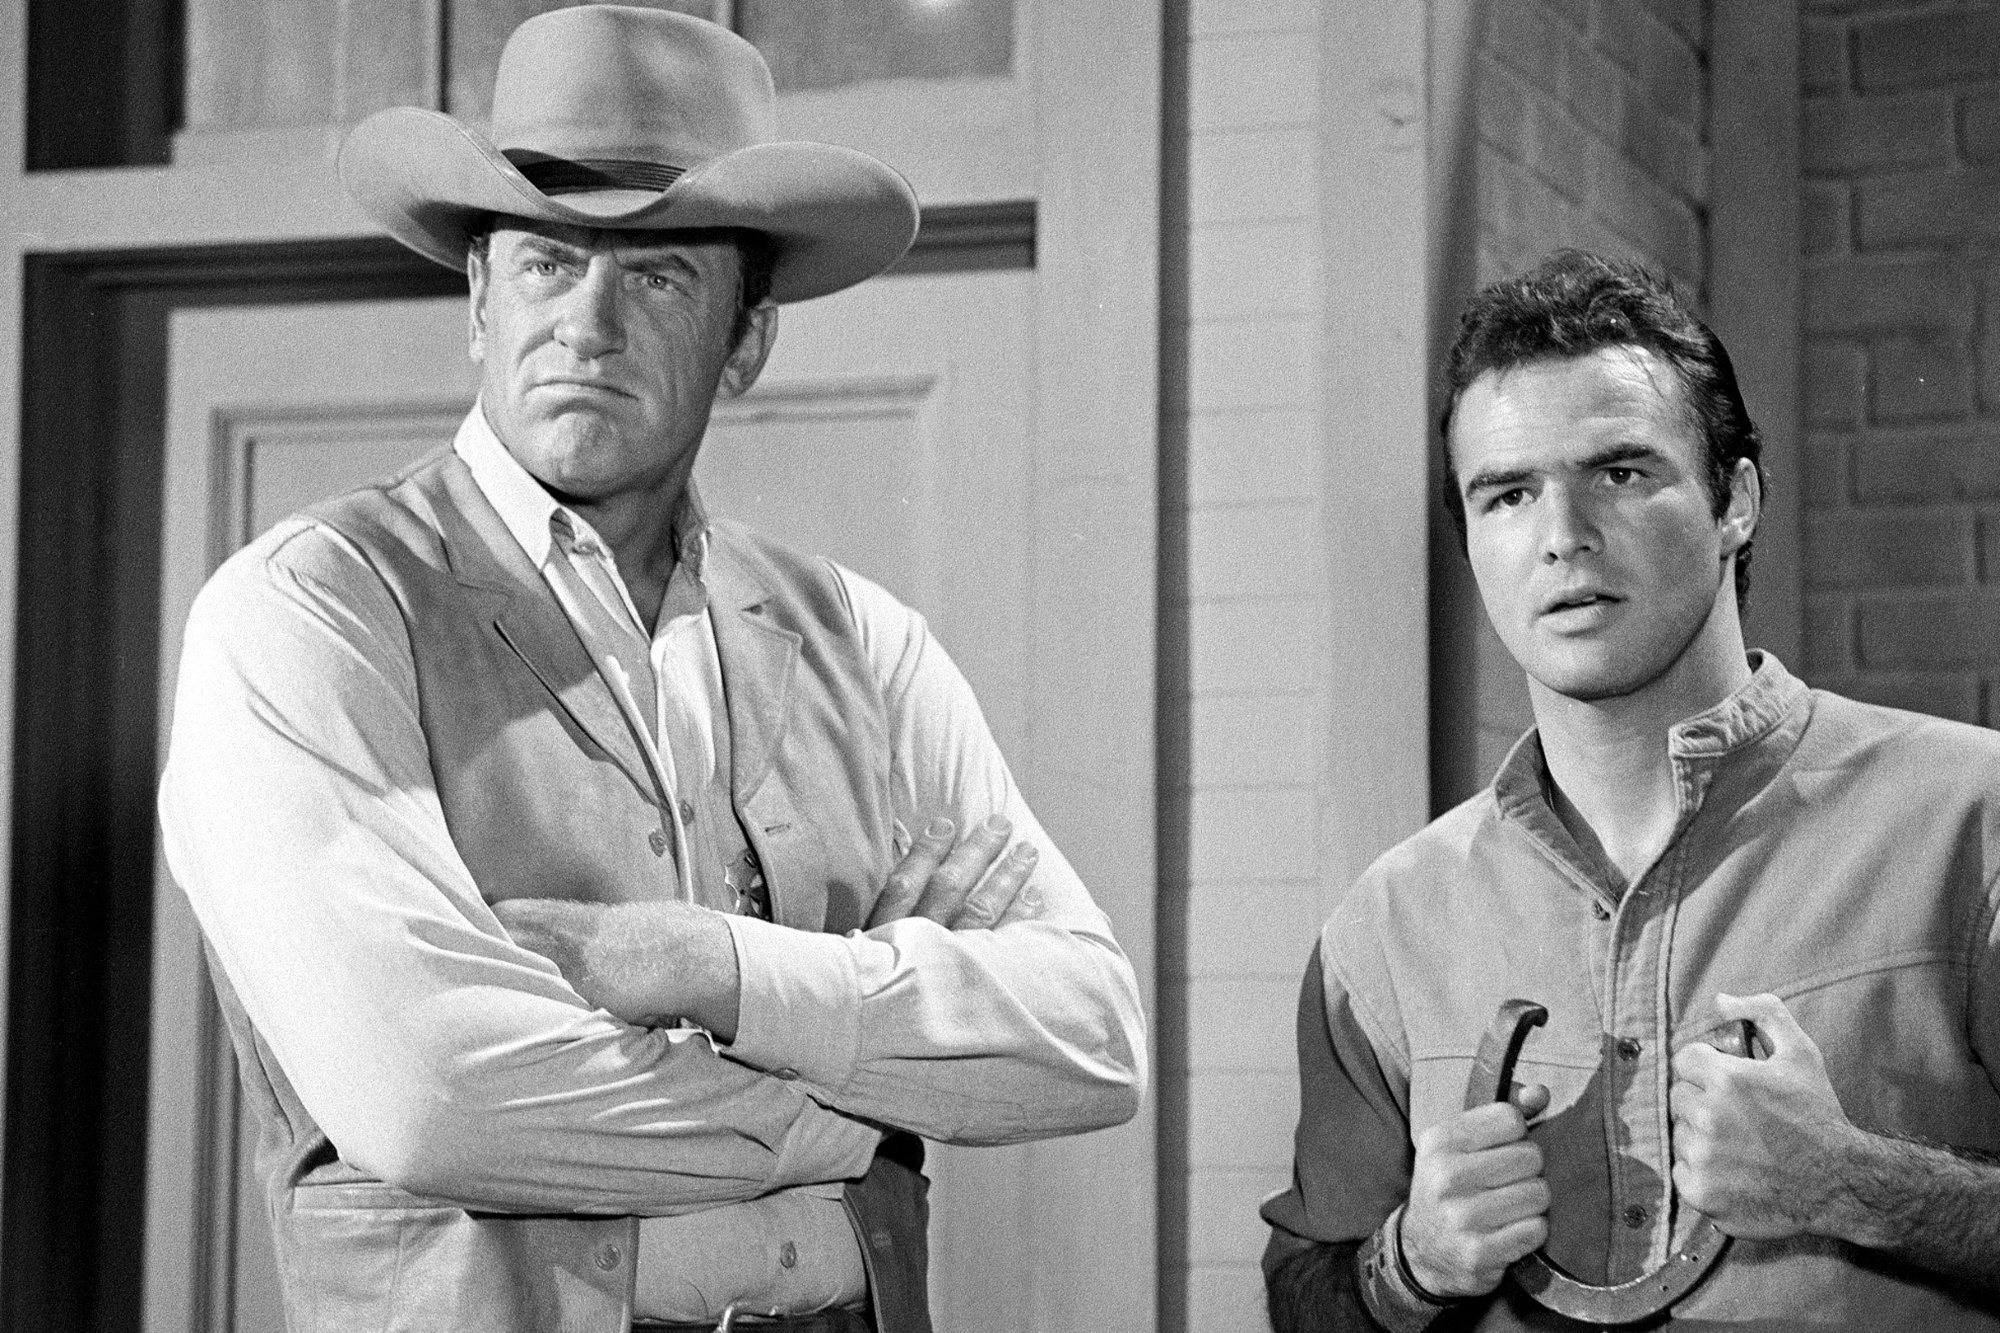 'Gunsmoke' James Arness as Matt Dillon and Burt Reynolds as Quint Asper. Arness has his arms crossed with a frown on his face. Reynolds is holding a horseshoe with his mouth slightly open.